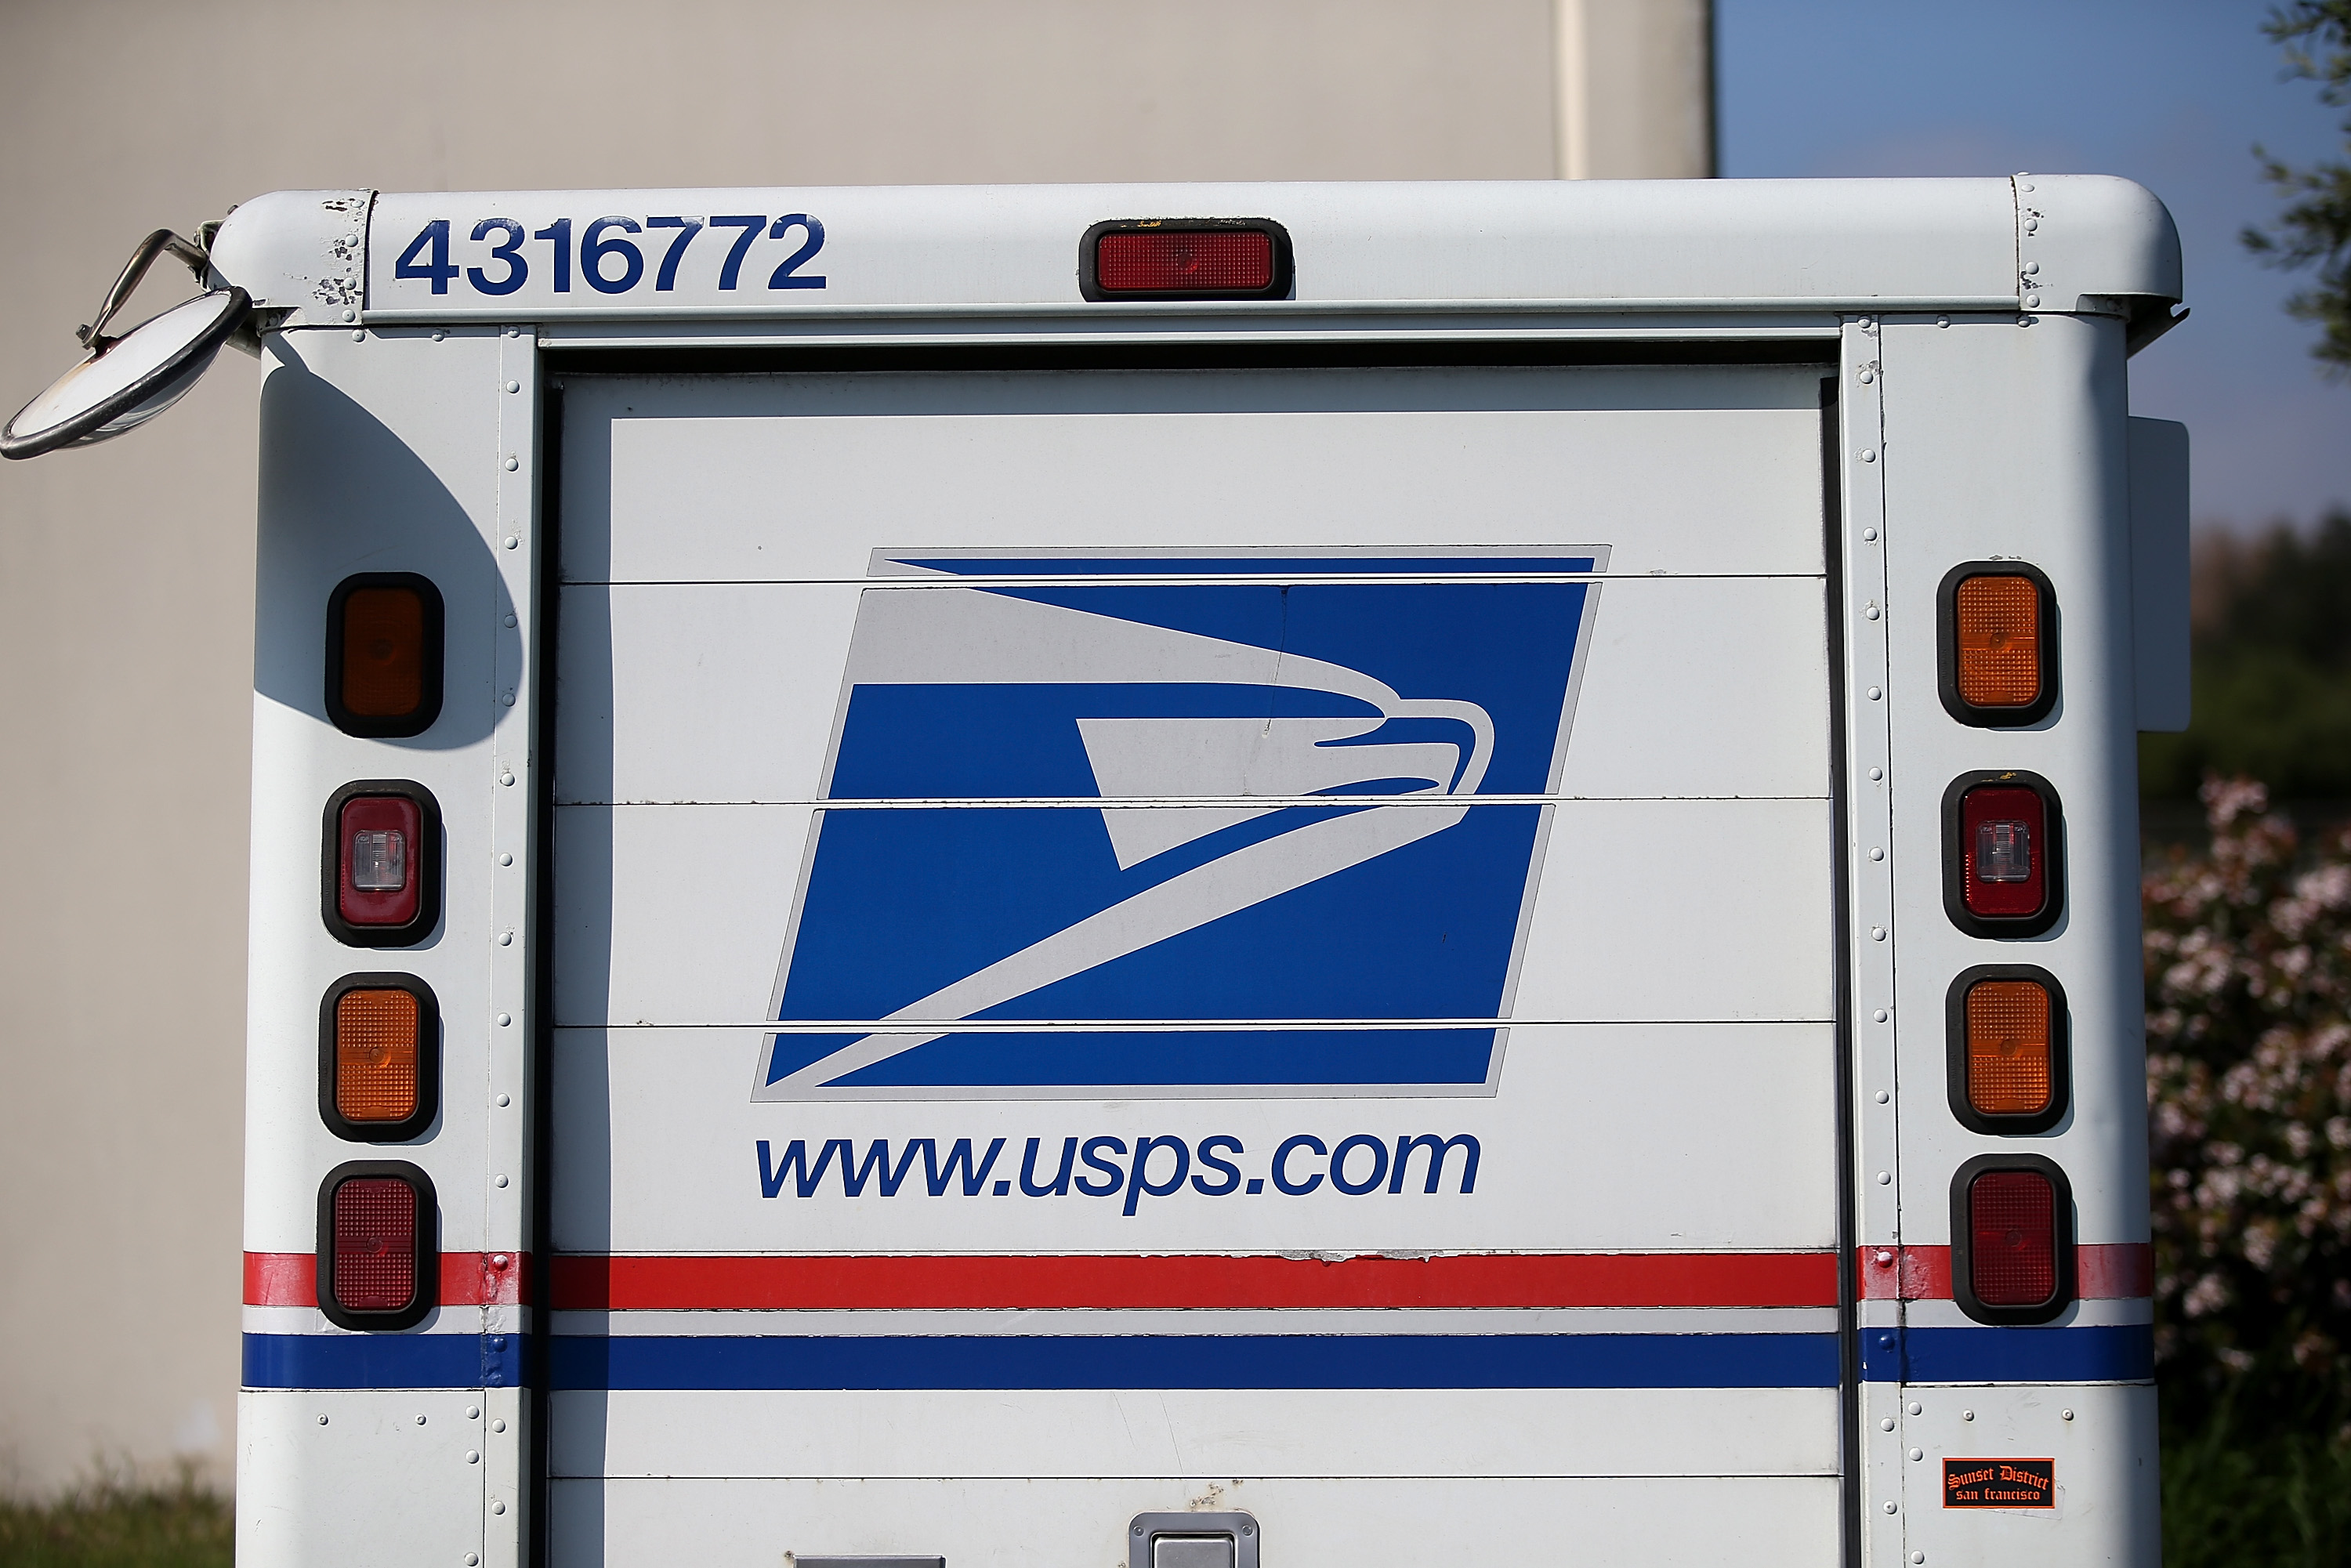 A U.S. Postal Service mail truck sits in a parking lot at a mail distribution center on February 18, 2015 in San Francisco, California. (Justin Sullivan&mdash;Getty Images)